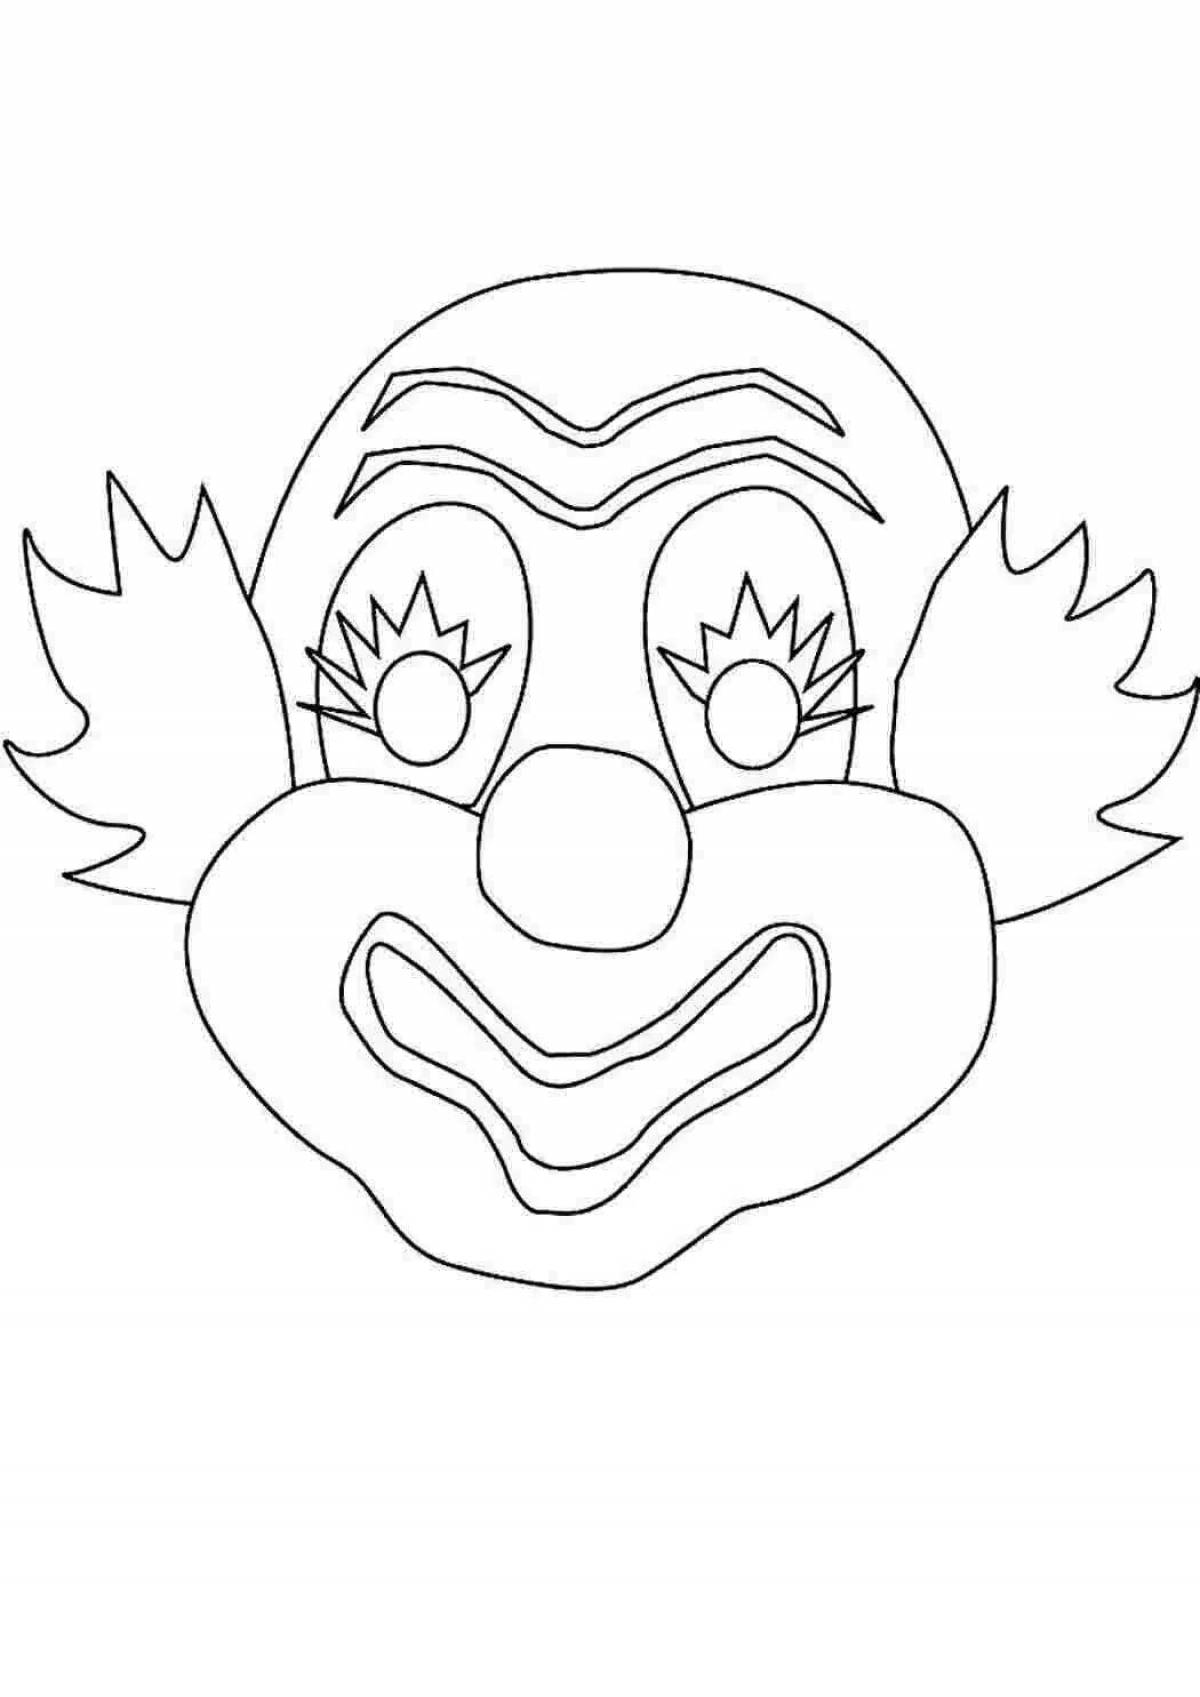 Coloring bright clown mask